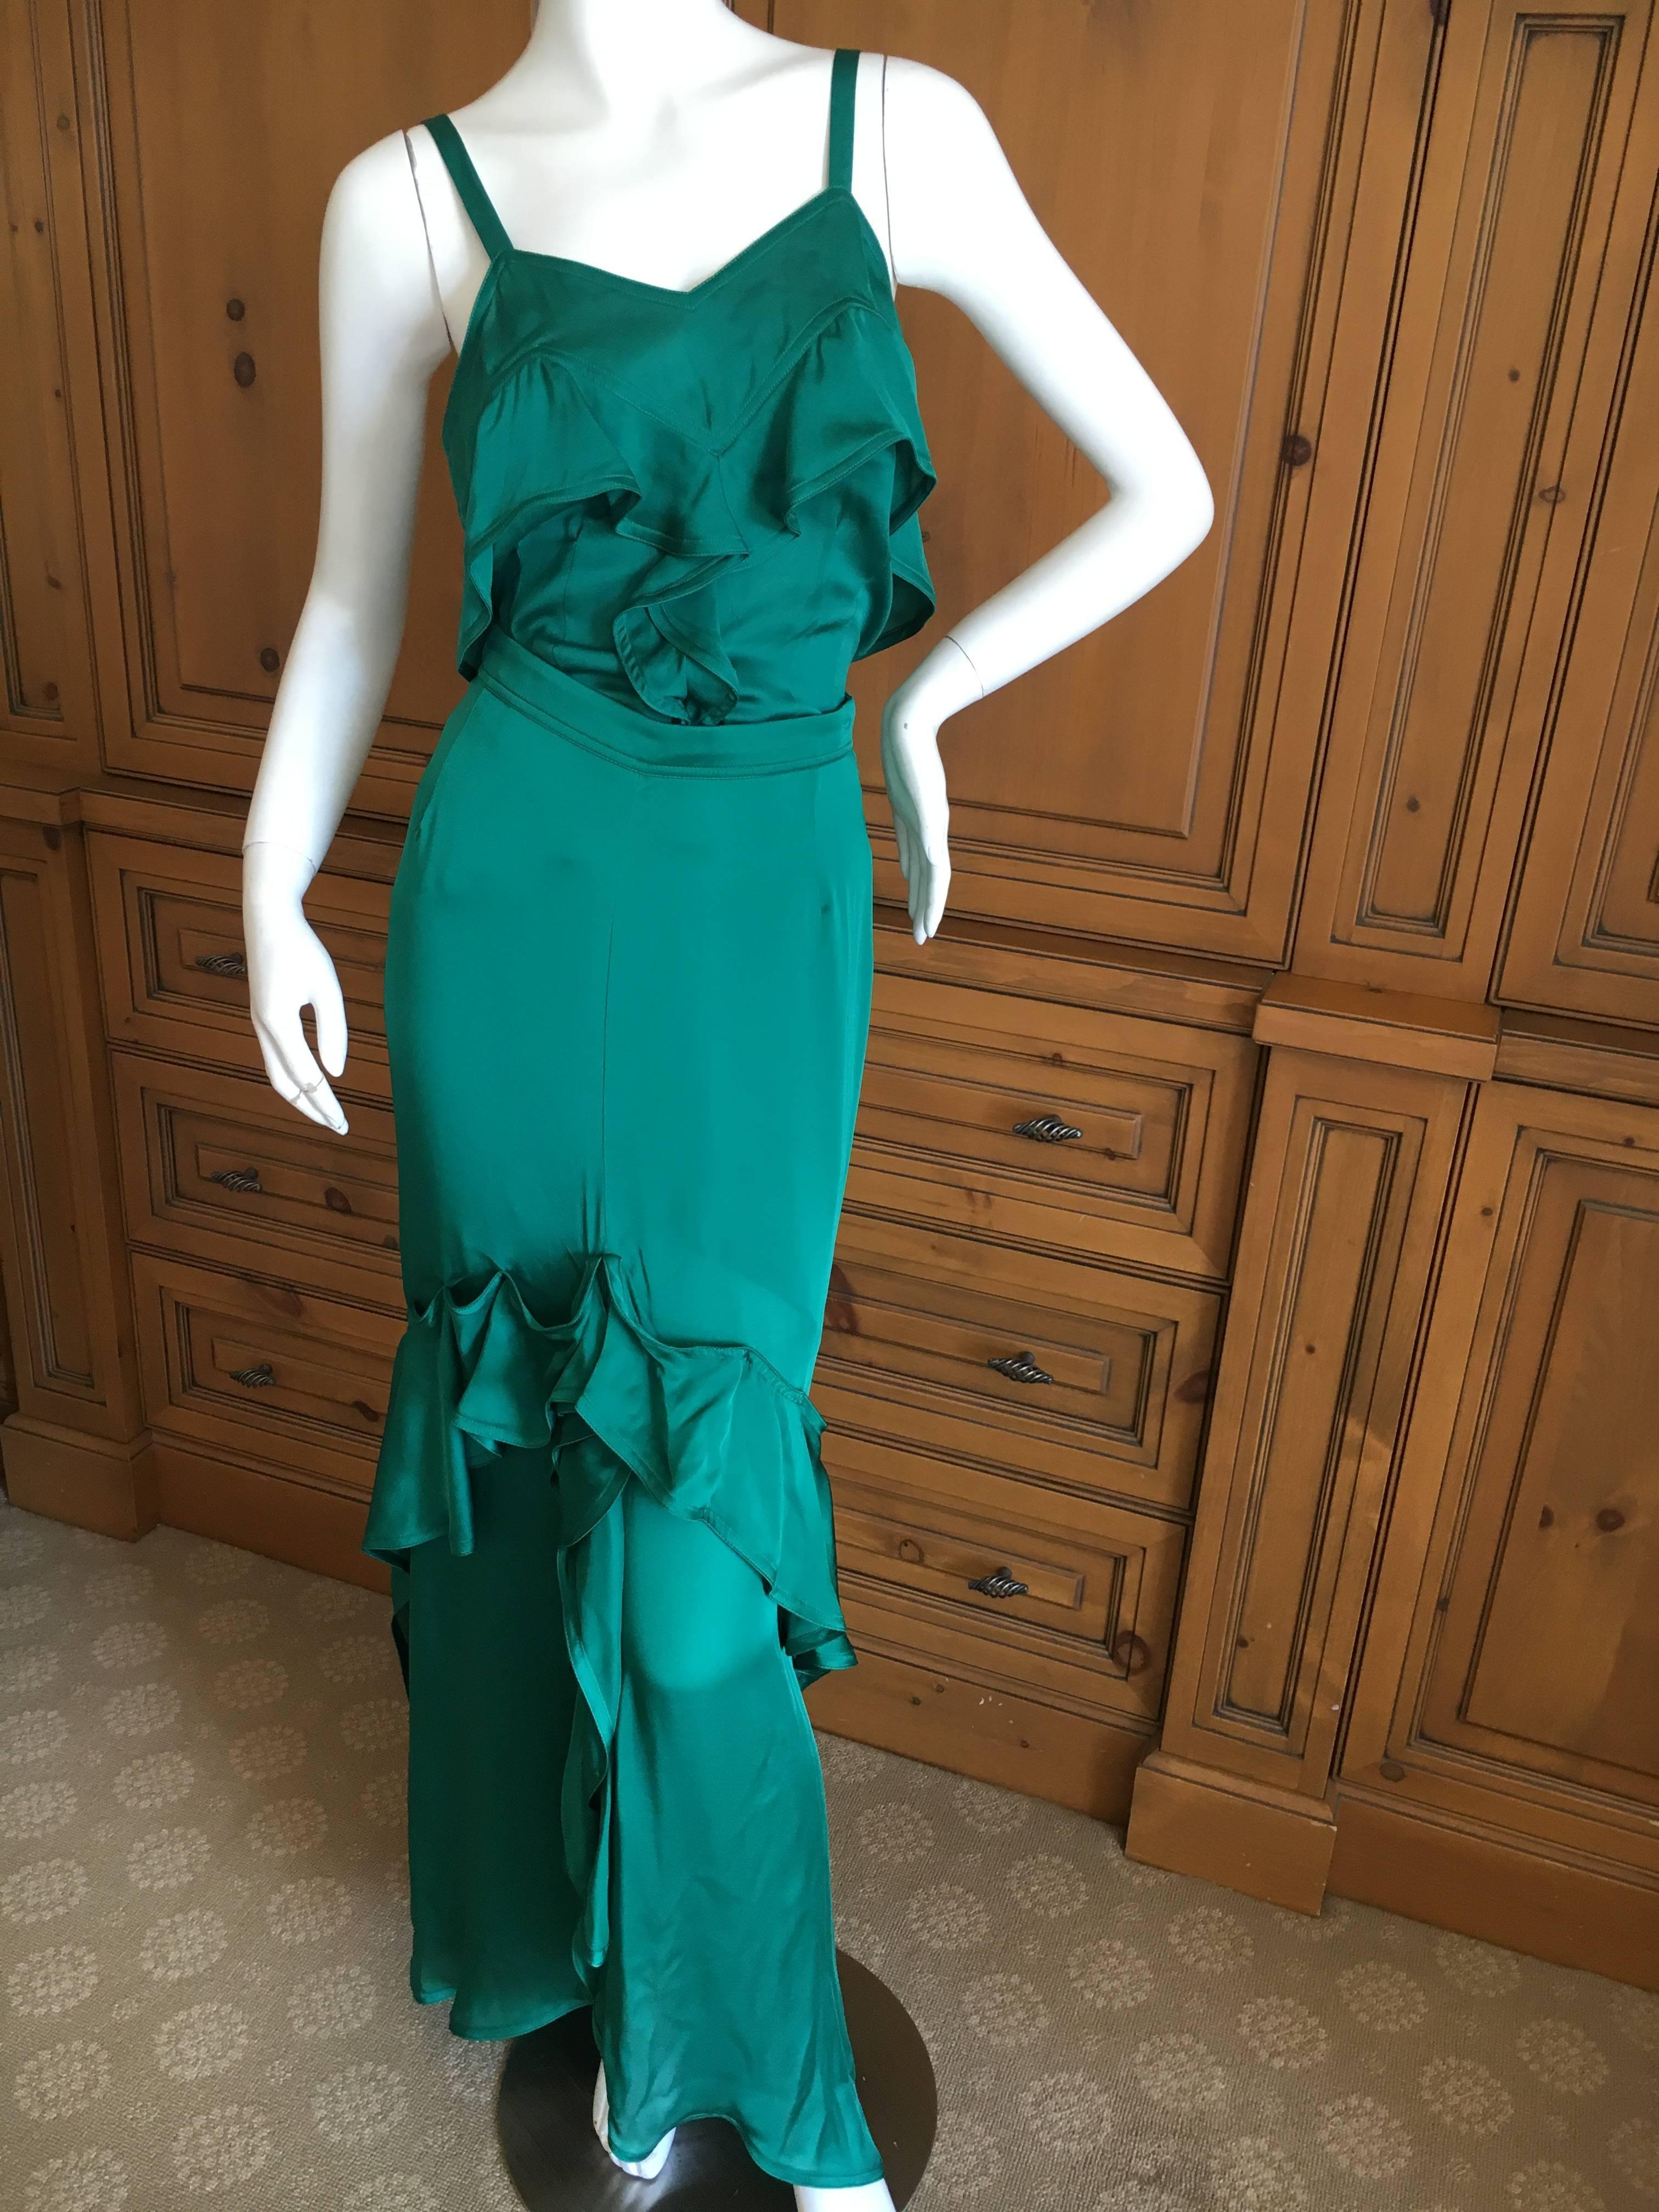 Yves Saint Laurent by Tom Ford 2003 Two Piece Ruffled Silk Dress New with Tags For Sale 1